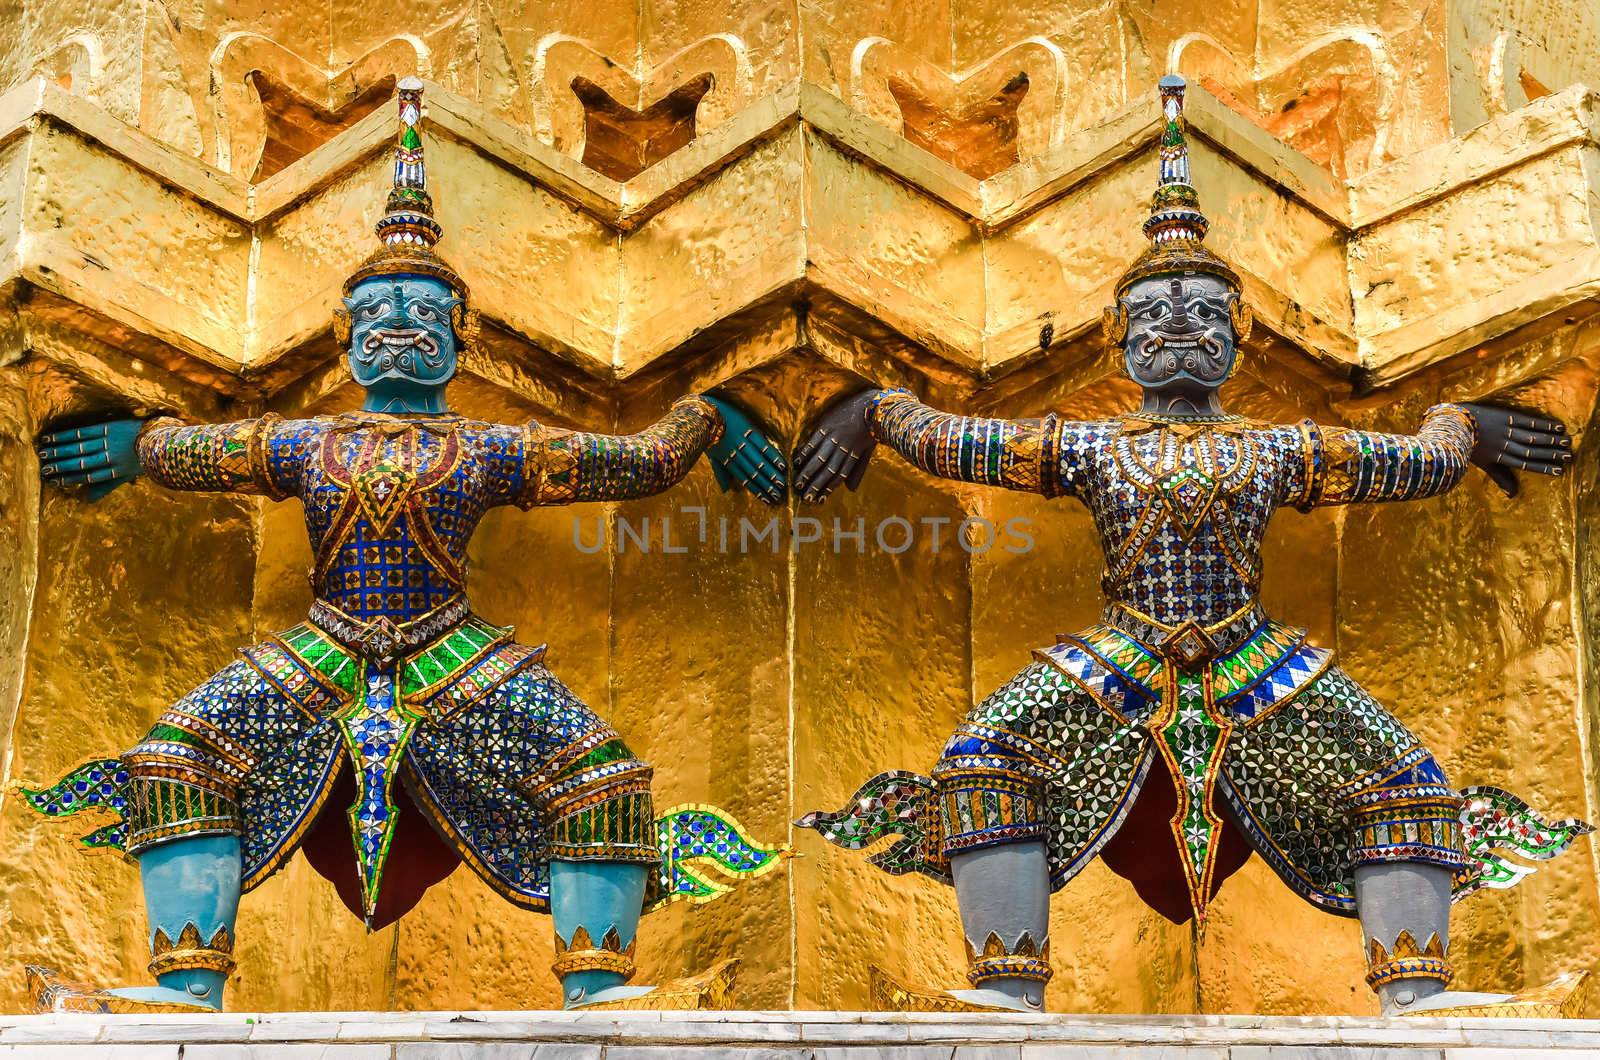 Detail of statues in Grand palace temple, Bangkok by martinm303